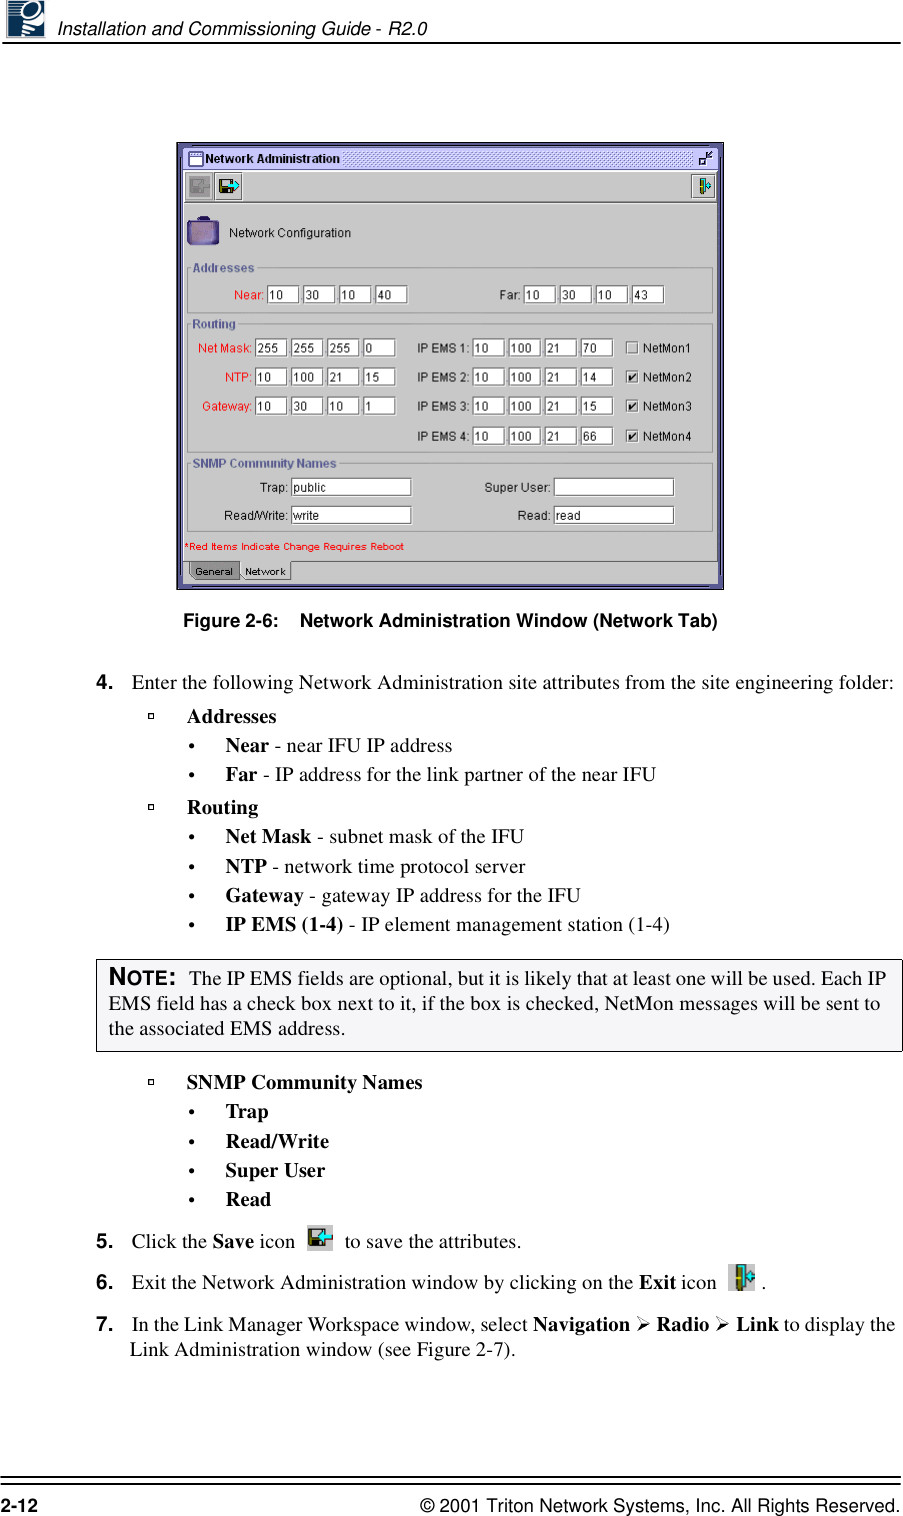  Installation and Commissioning Guide - R2.02-12 © 2001 Triton Network Systems, Inc. All Rights Reserved.Figure 2-6:    Network Administration Window (Network Tab)4. Enter the following Network Administration site attributes from the site engineering folder:Addresses•Near - near IFU IP address•Far - IP address for the link partner of the near IFURouting•Net Mask - subnet mask of the IFU•NTP - network time protocol server •Gateway - gateway IP address for the IFU•IP EMS (1-4) - IP element management station (1-4) SNMP Community Names•Trap•Read/Write•Super User•Read5. Click the Save icon   to save the attributes.6. Exit the Network Administration window by clicking on the Exit icon  . 7. In the Link Manager Workspace window, select Navigation  Radio   Link to display the Link Administration window (see Figure 2-7). NOTE:  The IP EMS fields are optional, but it is likely that at least one will be used. Each IP EMS field has a check box next to it, if the box is checked, NetMon messages will be sent to the associated EMS address.